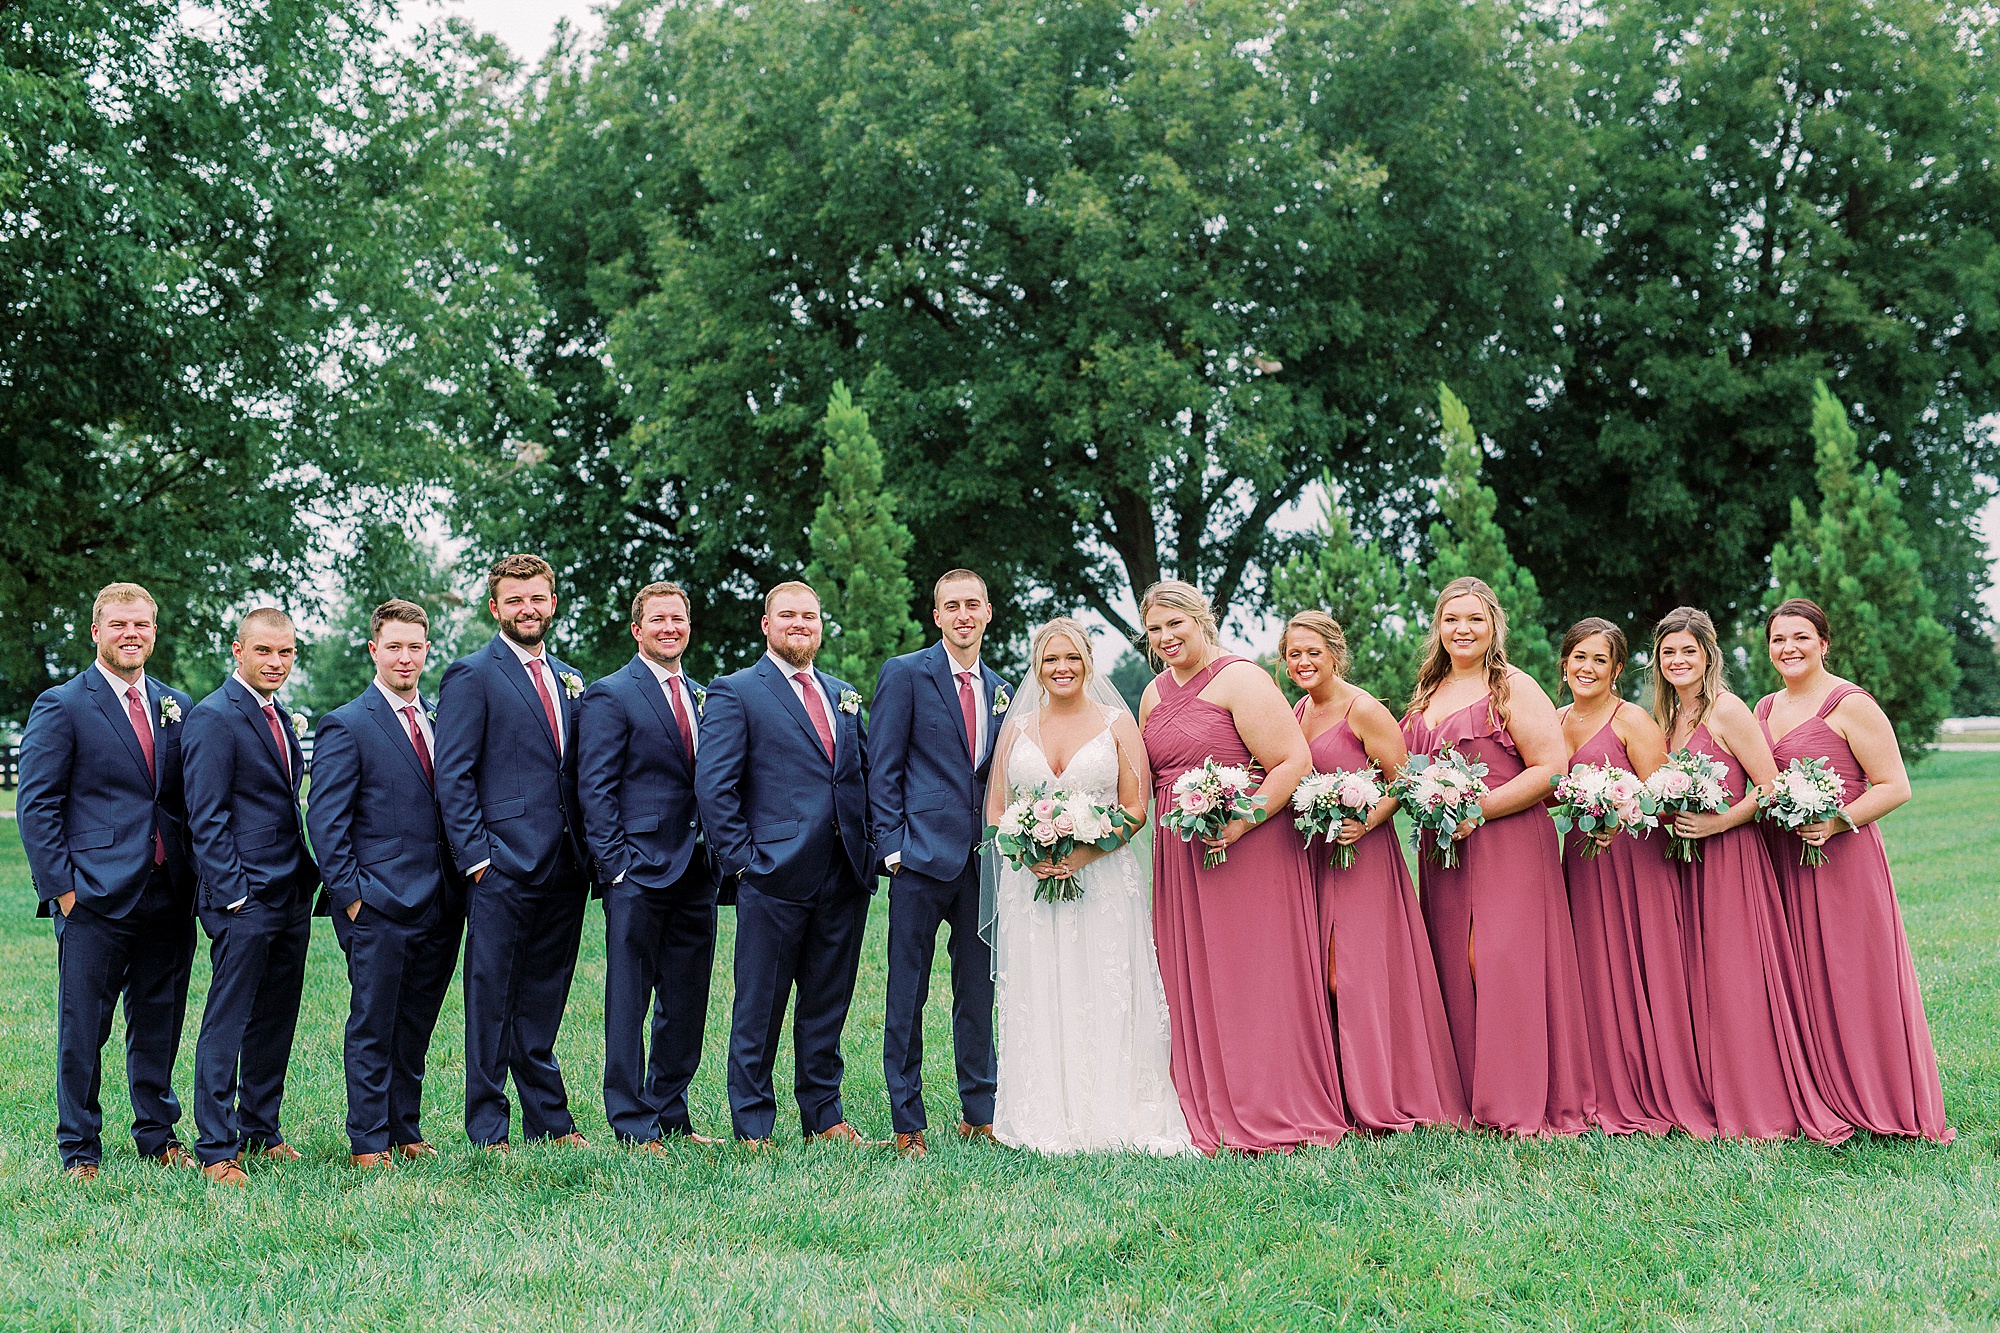 bride and groom pose with wedding party in navy and dark pink